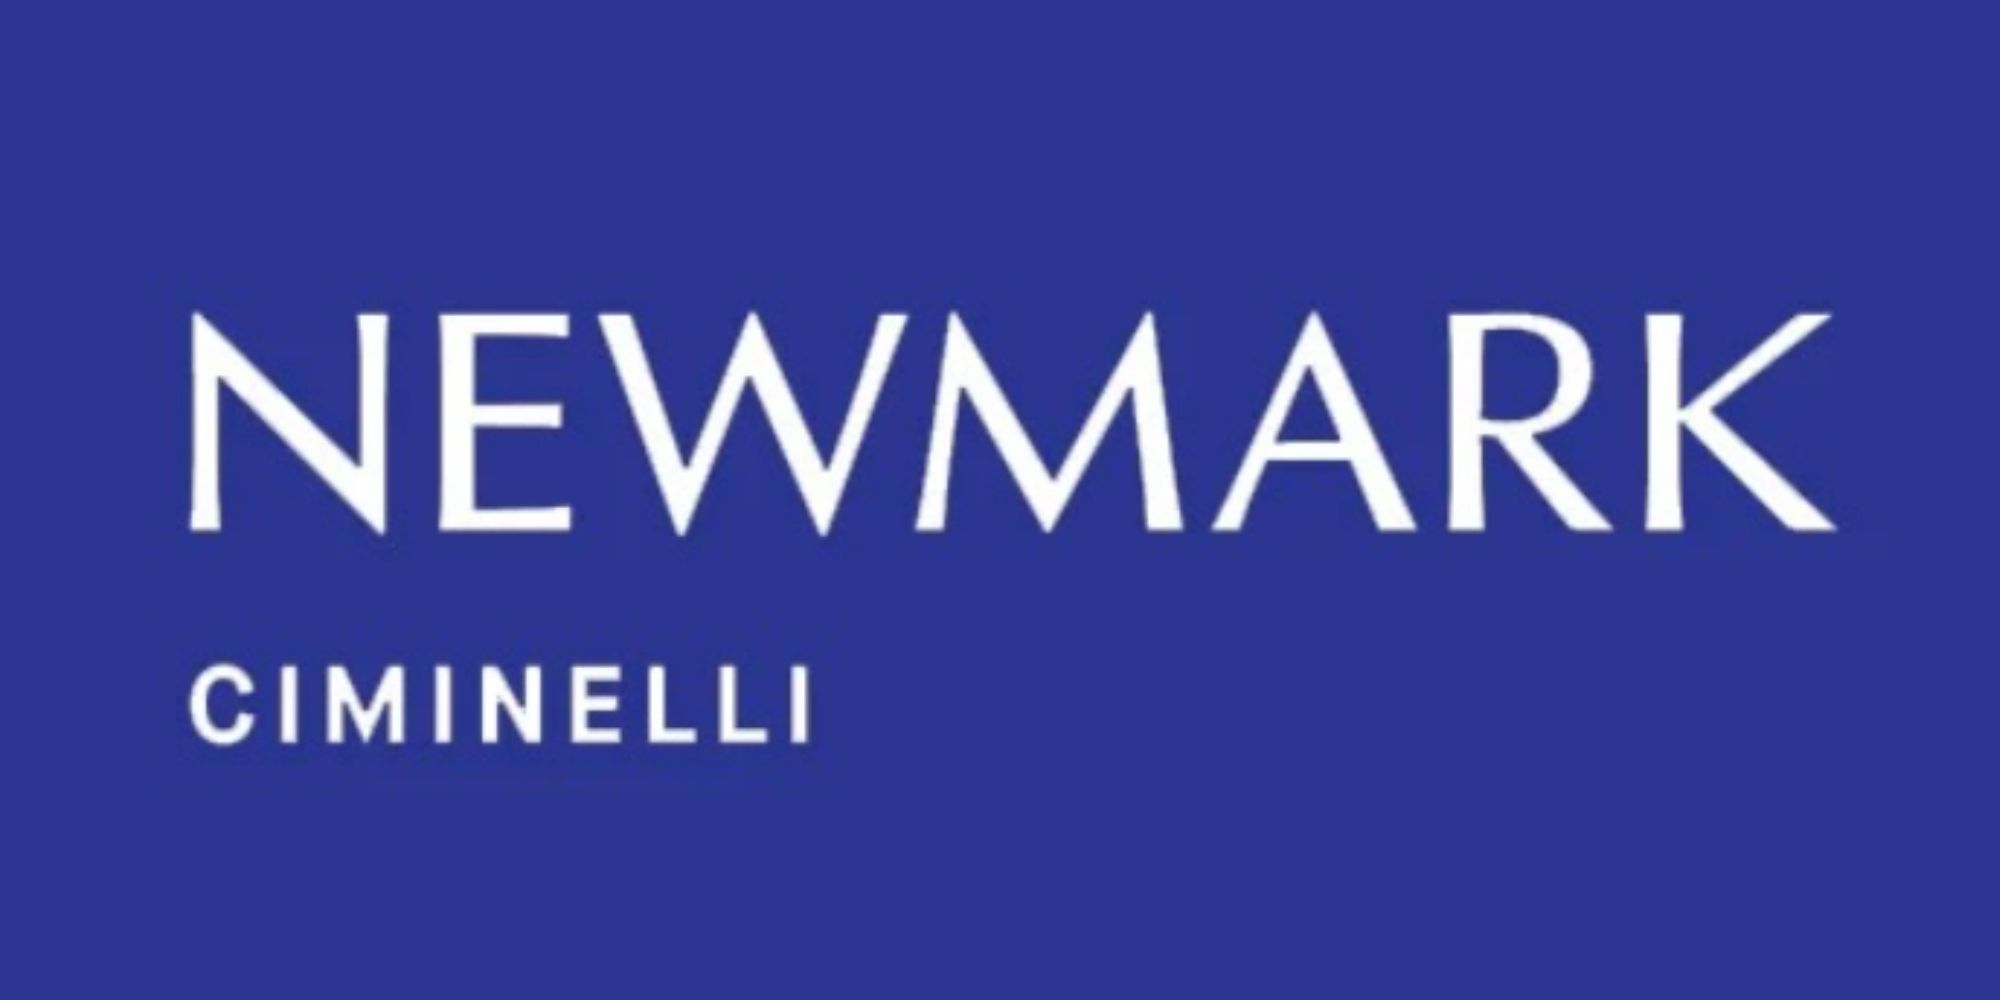 Ciminelli affiliates with Newmark Group for national brand